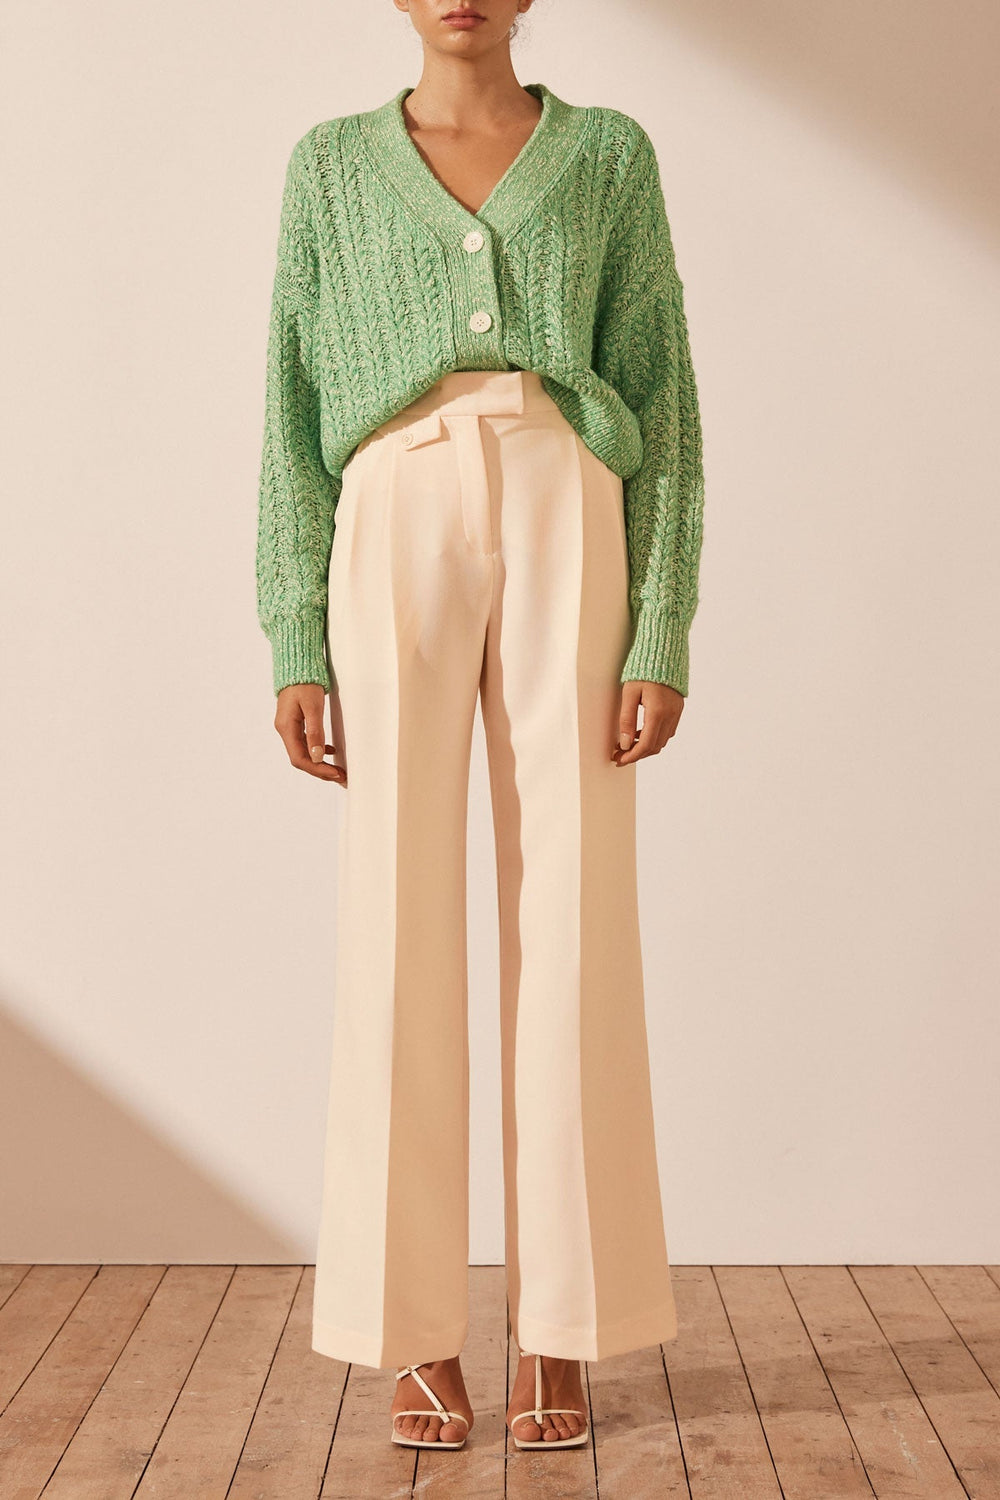 LORNA LUXE GREEN 'BUT FIRST' CARDIGAN